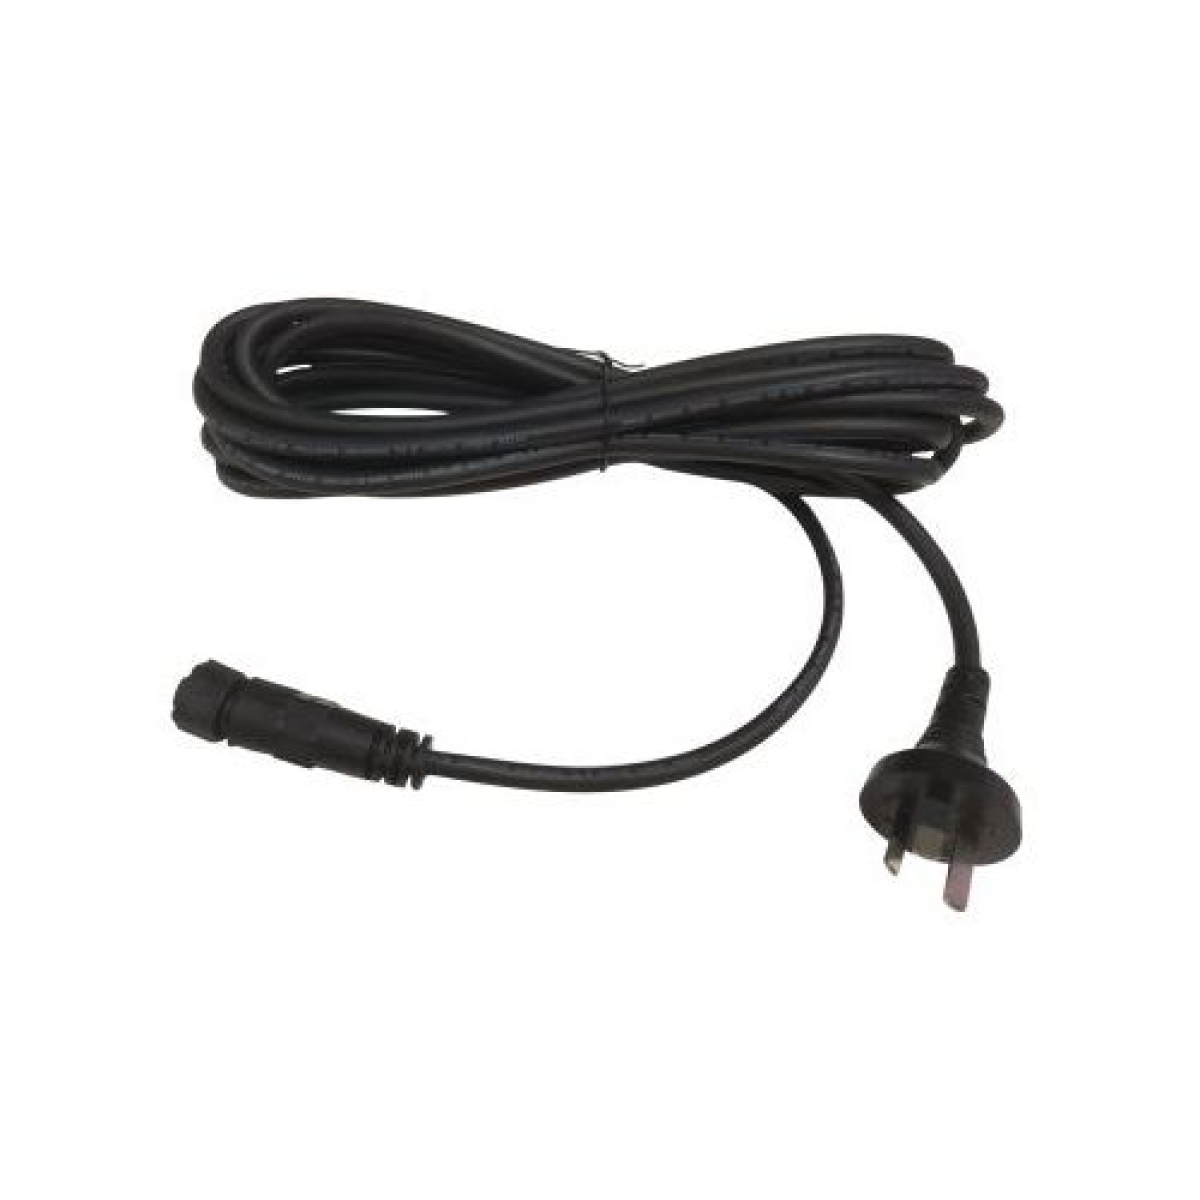 Intex Replacement Charging cord for SLB2500 & SLB4000